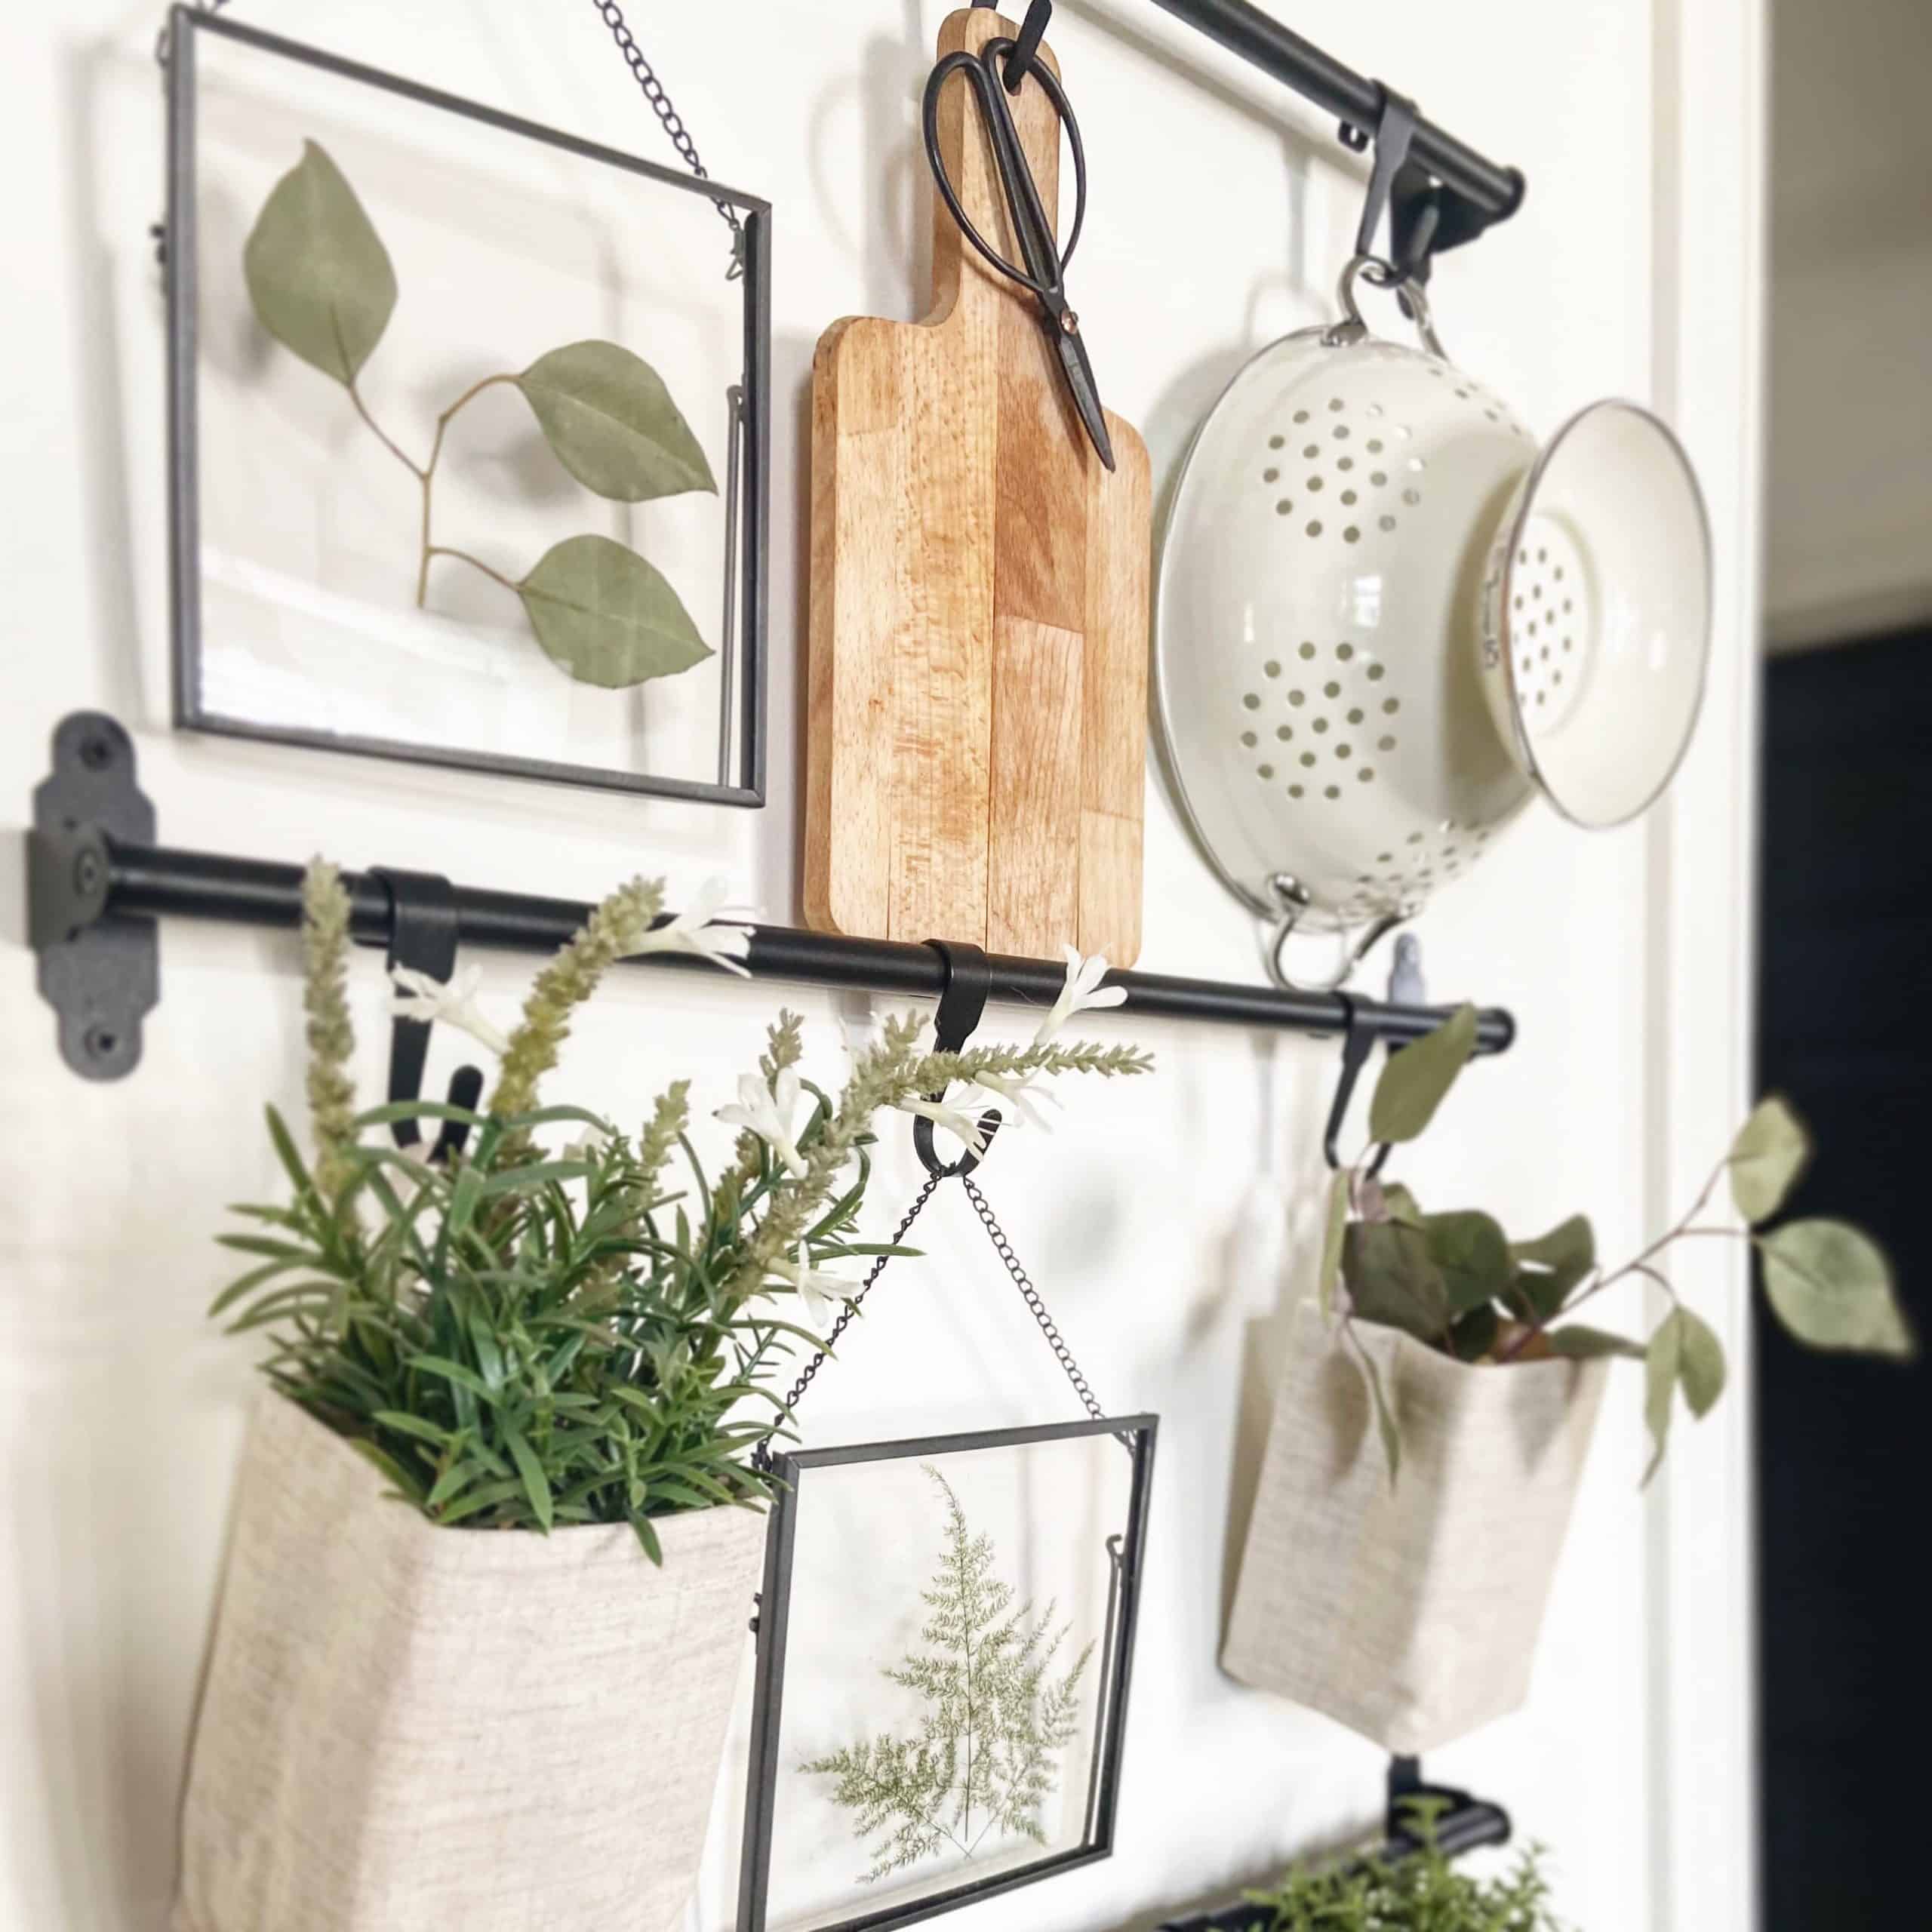 https://www.snazzylittlethings.com/wp-content/uploads/Kitchen-wall-with-Ikea-organizing-hardware-scaled.jpg